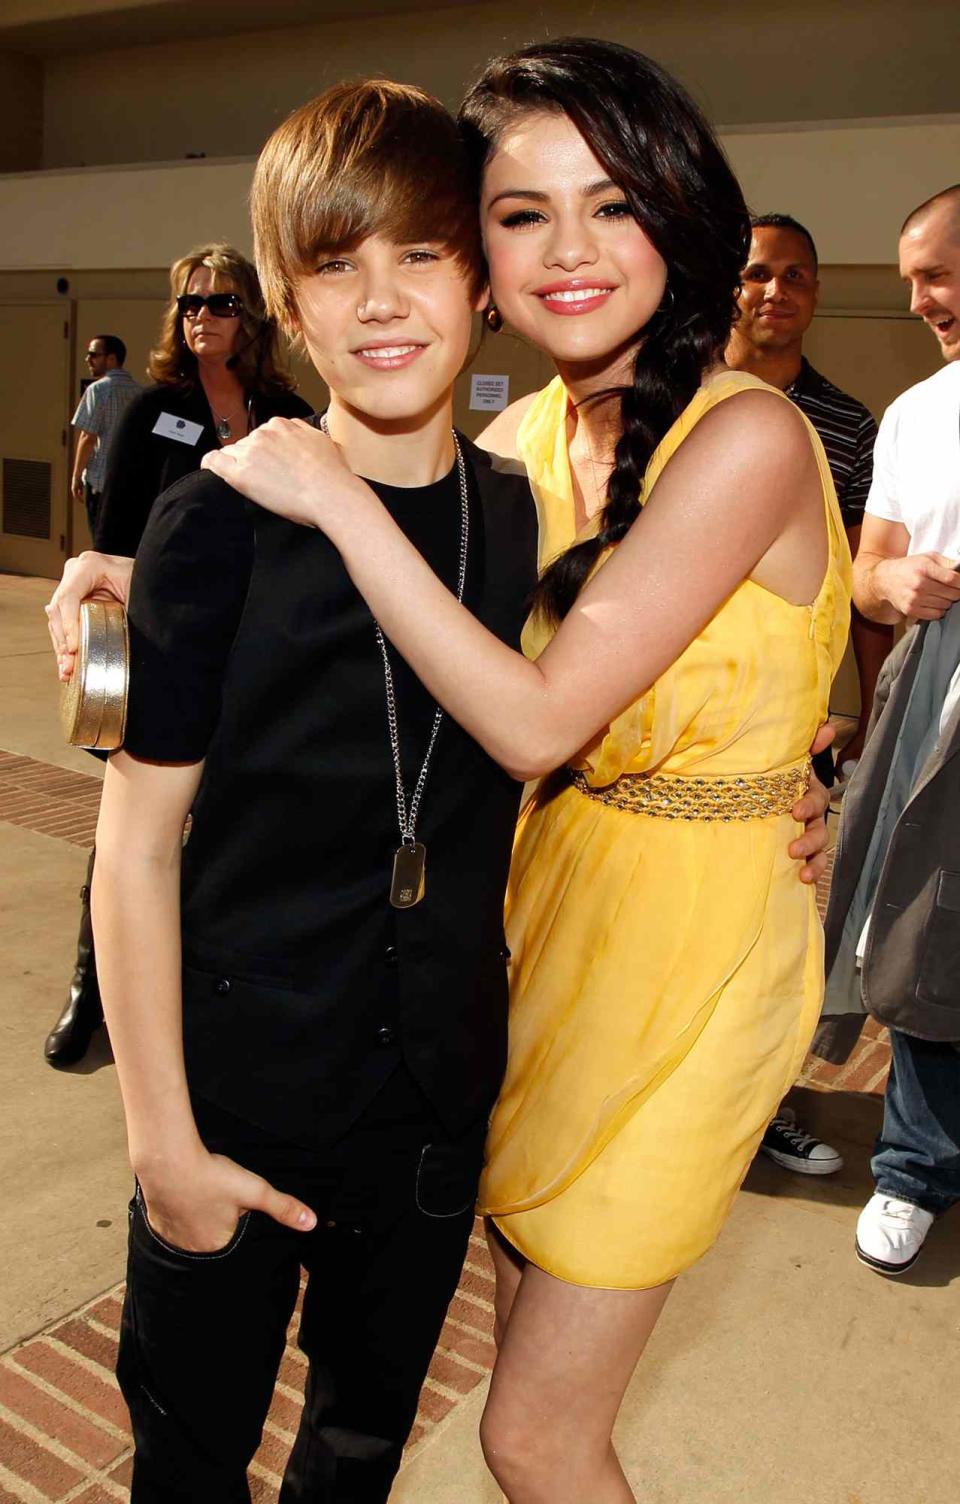 Justin Bieber and actress Selena Gomez backstage at Nickelodeon's 23rd Annual Kids' Choice Awards held at UCLA's Pauley Pavilion on March 27, 2010 in Los Angeles, California